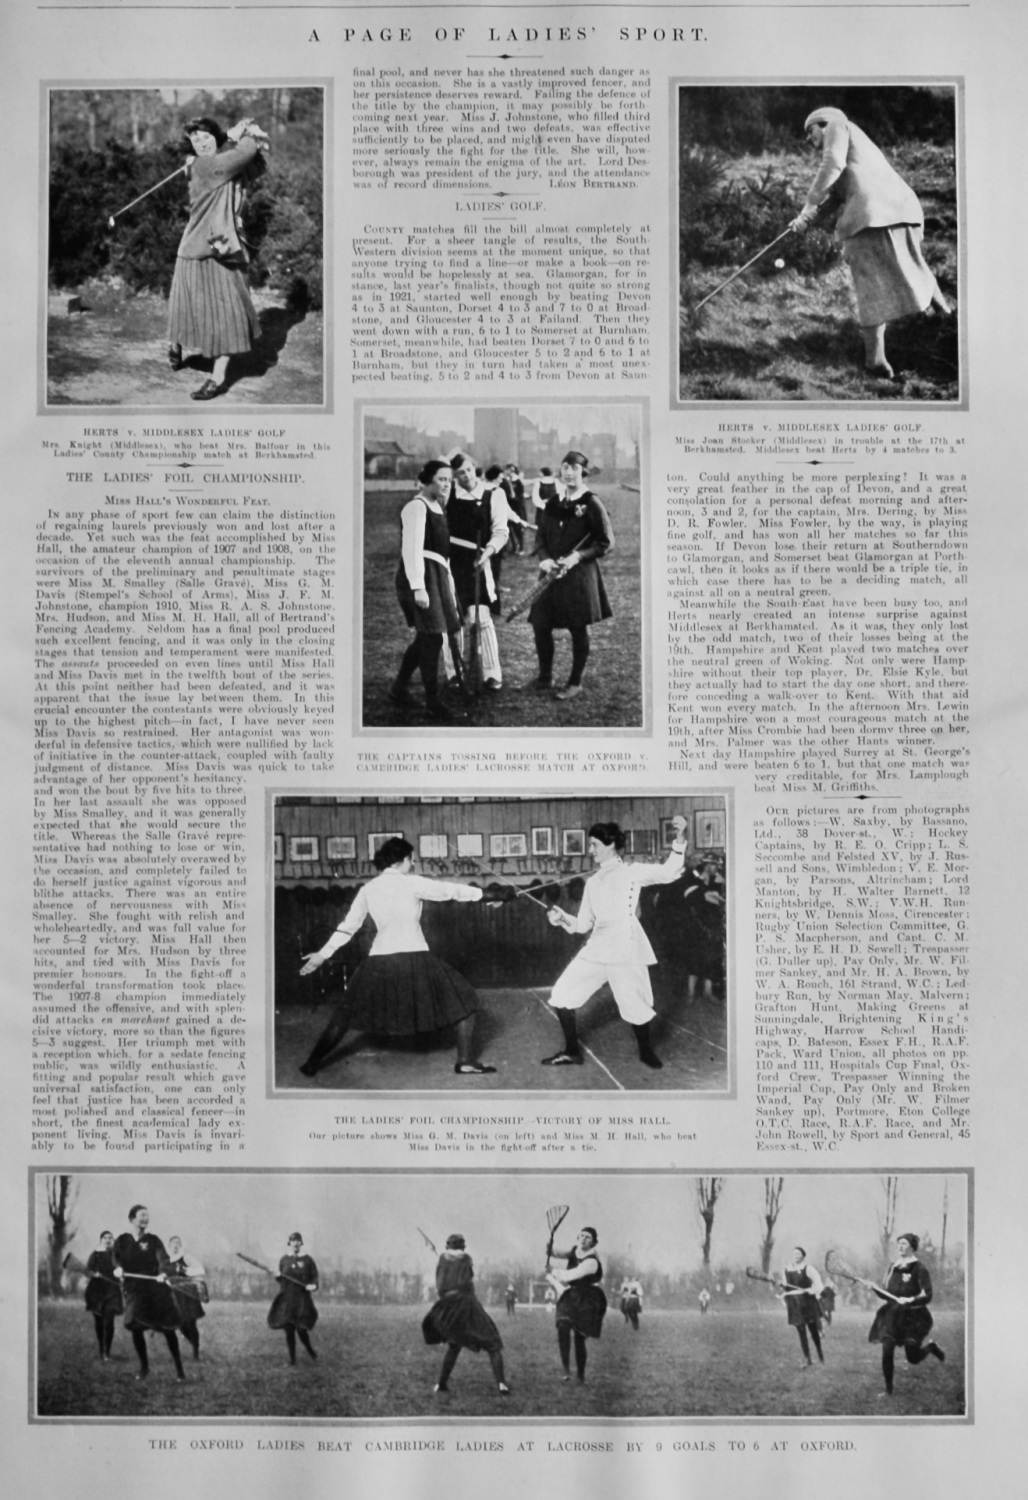 A Page of Ladies Sport.  1922.